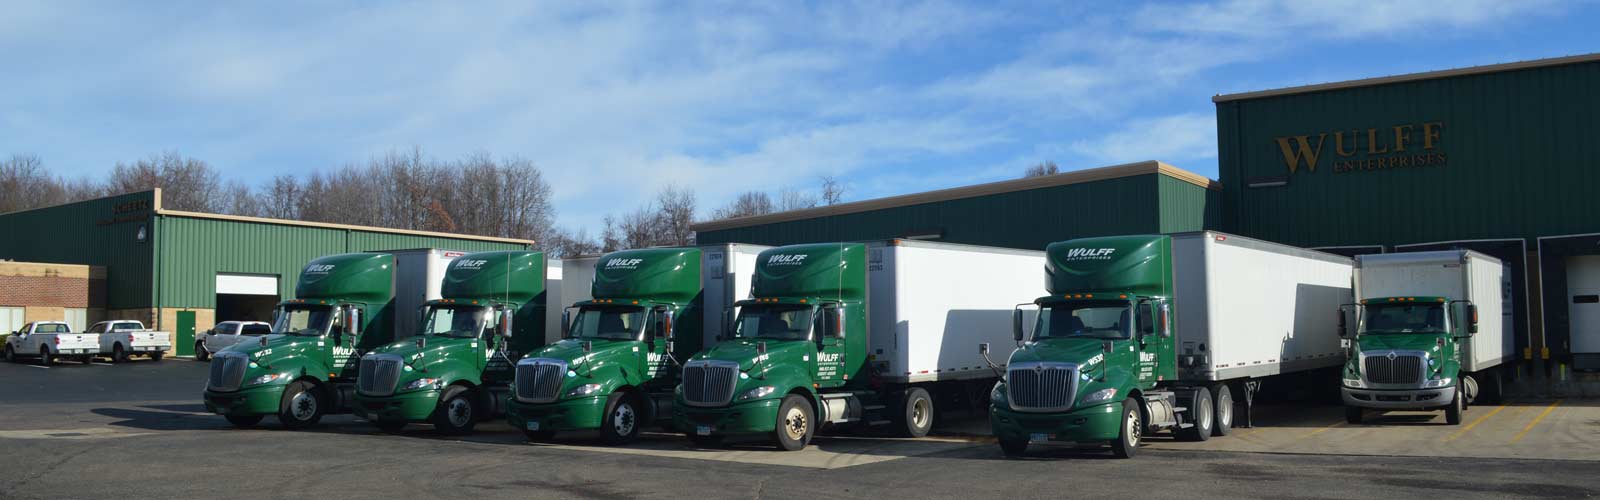 Four Wulff Enterprise tractor-trailers with Wulff logos on cabs.